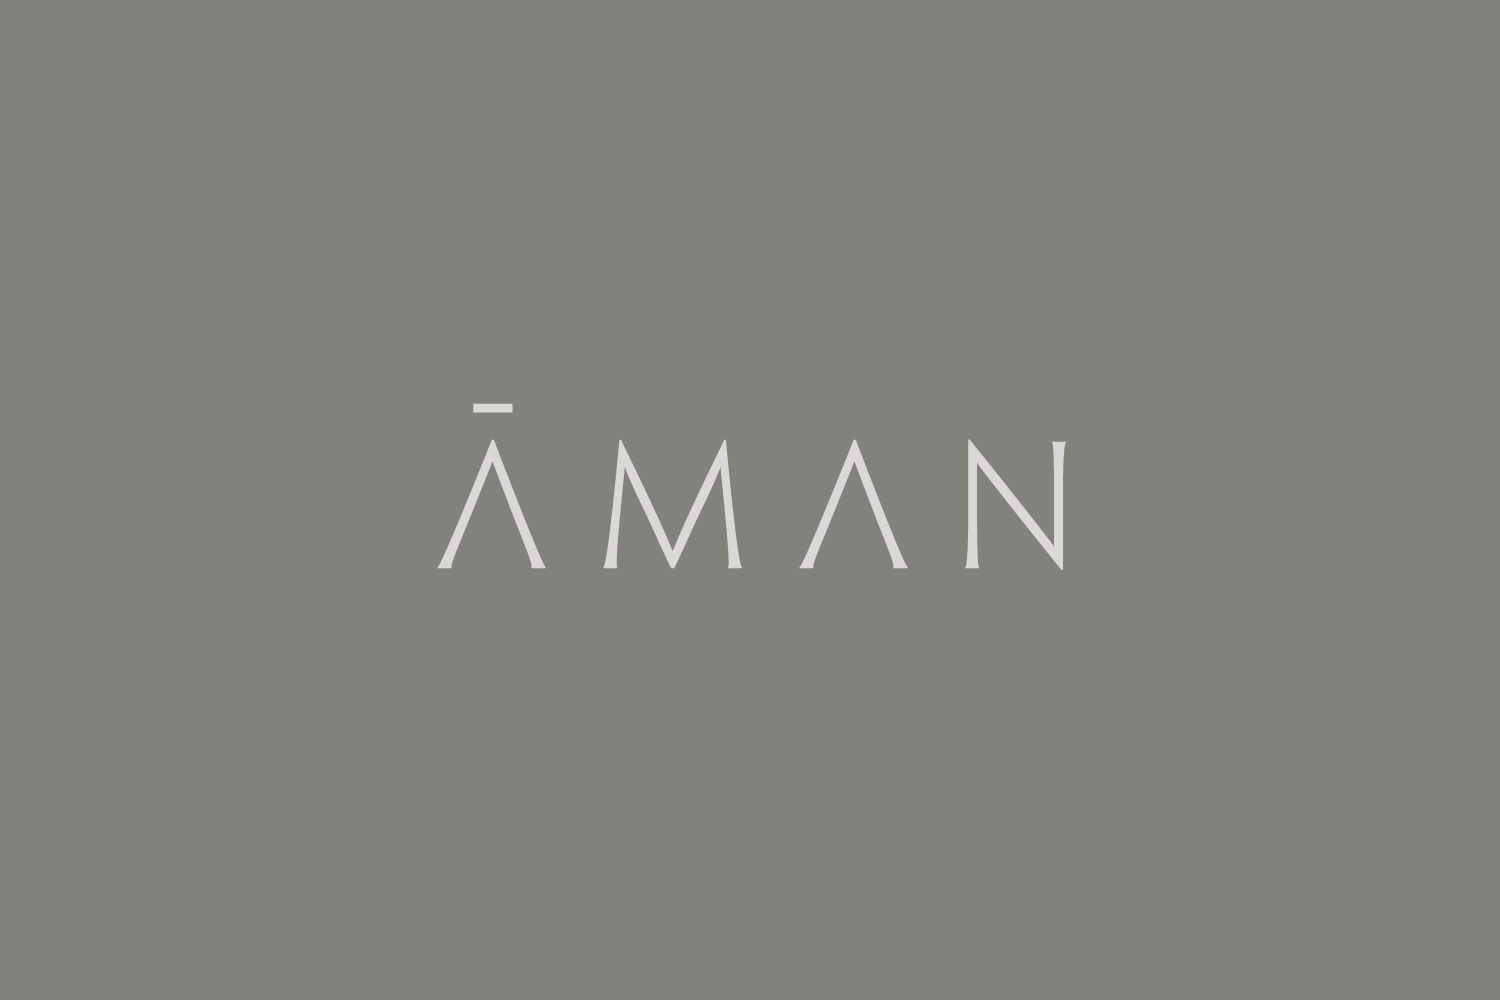 Creative Logotype Gallery & Inspiration: Aman by Construct, United Kingdom